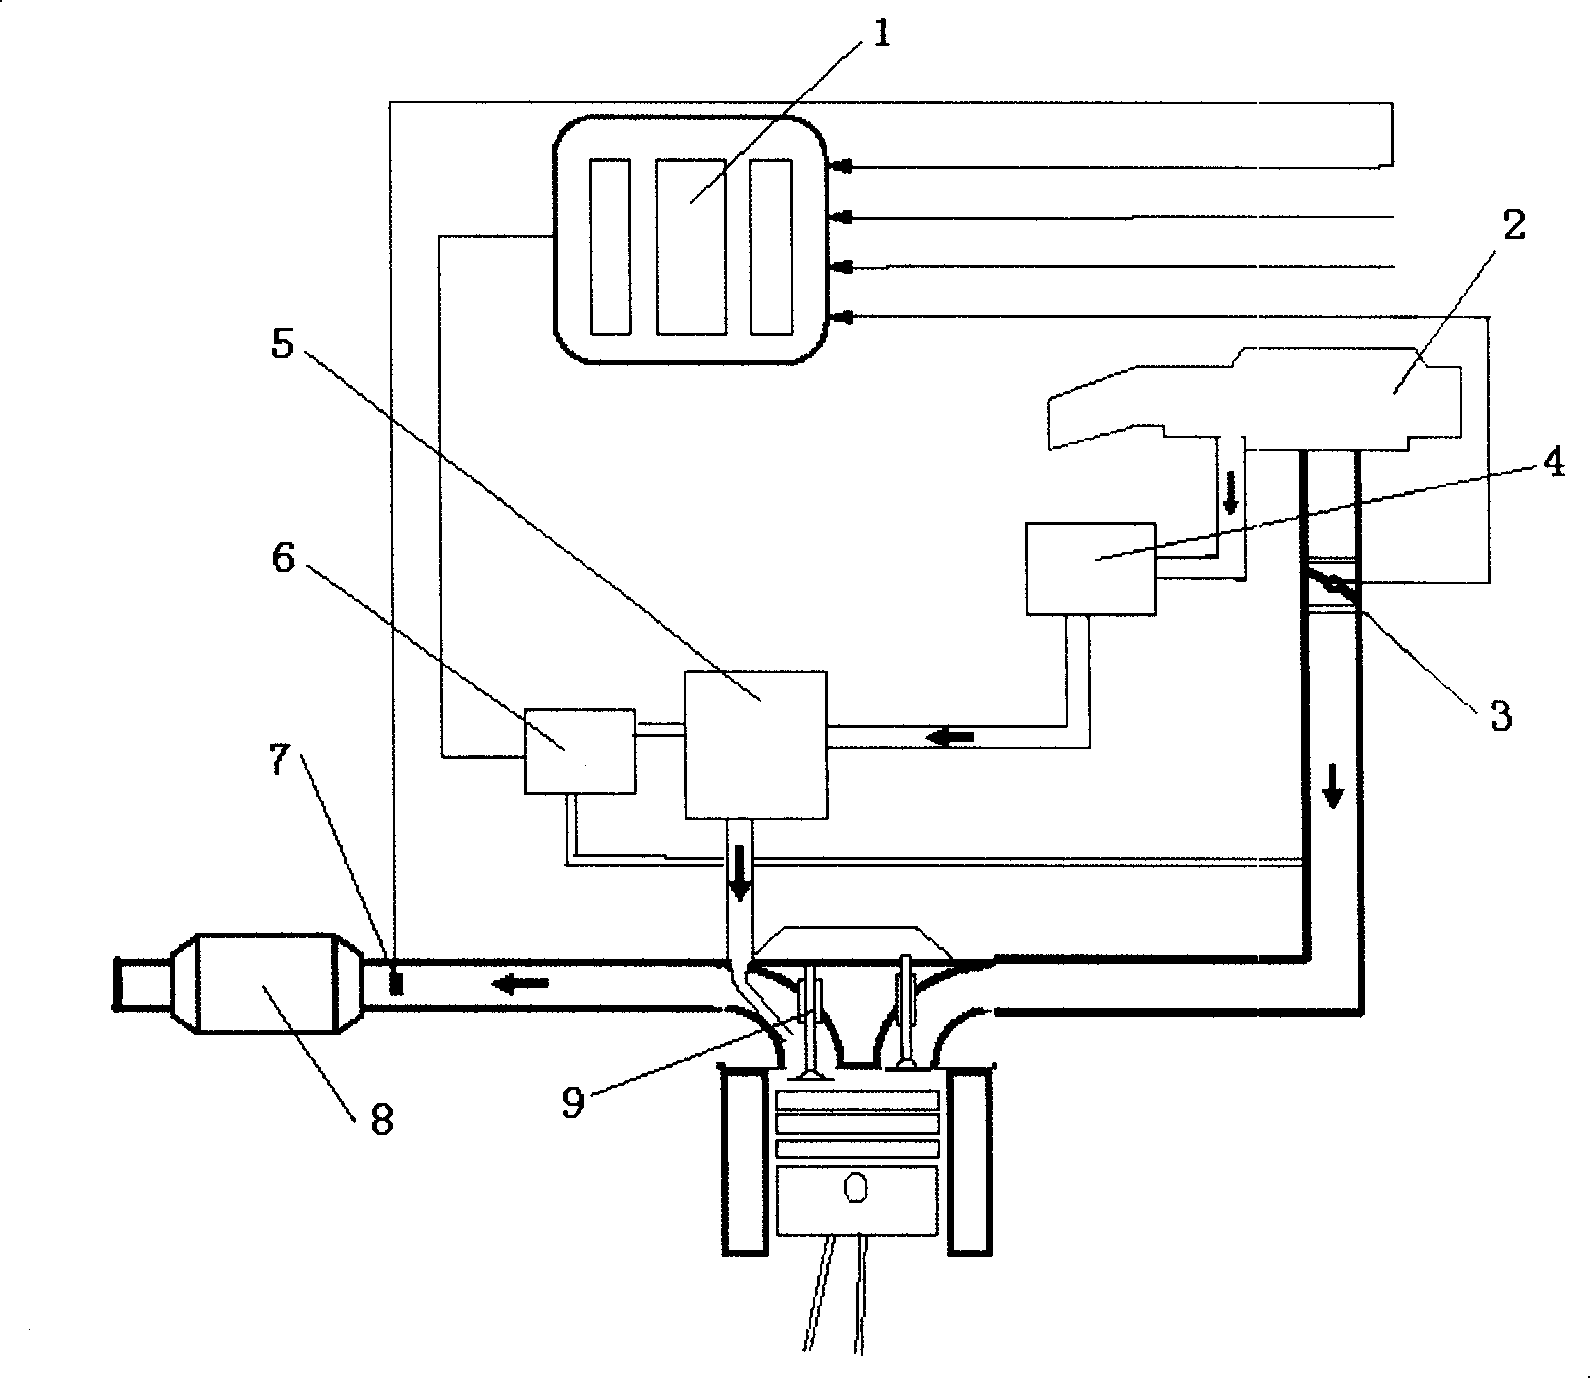 Method and system for modifying HC discharge of engine when starting